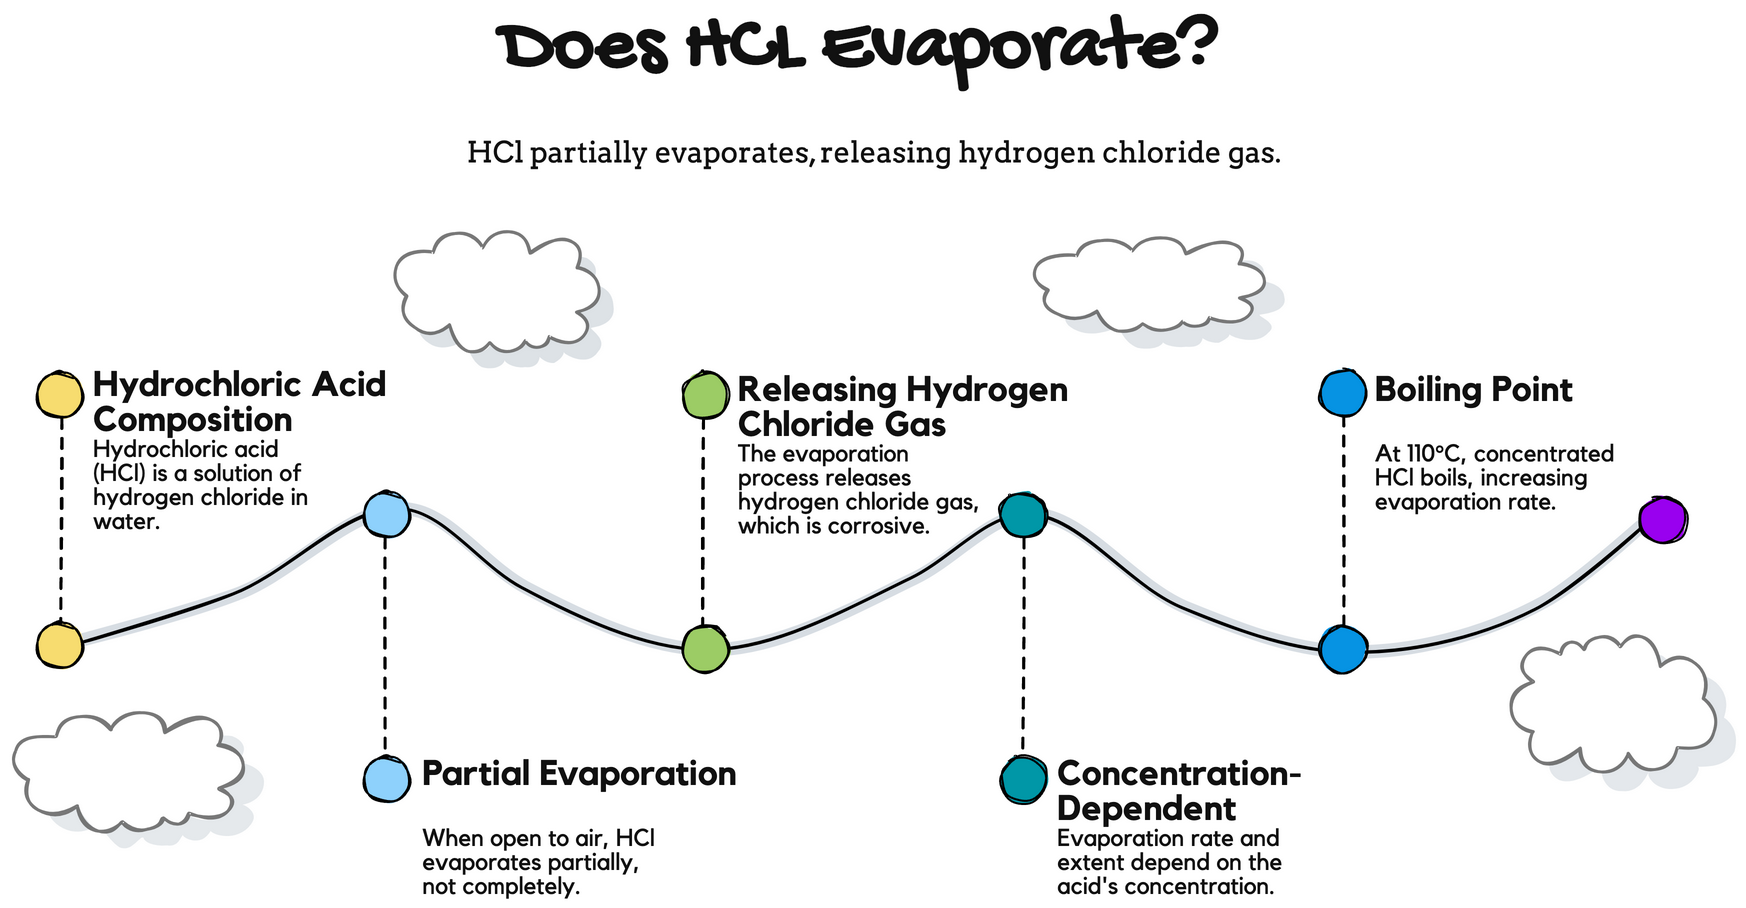 Does Hydrochloric Acid (HCl) Evaporate